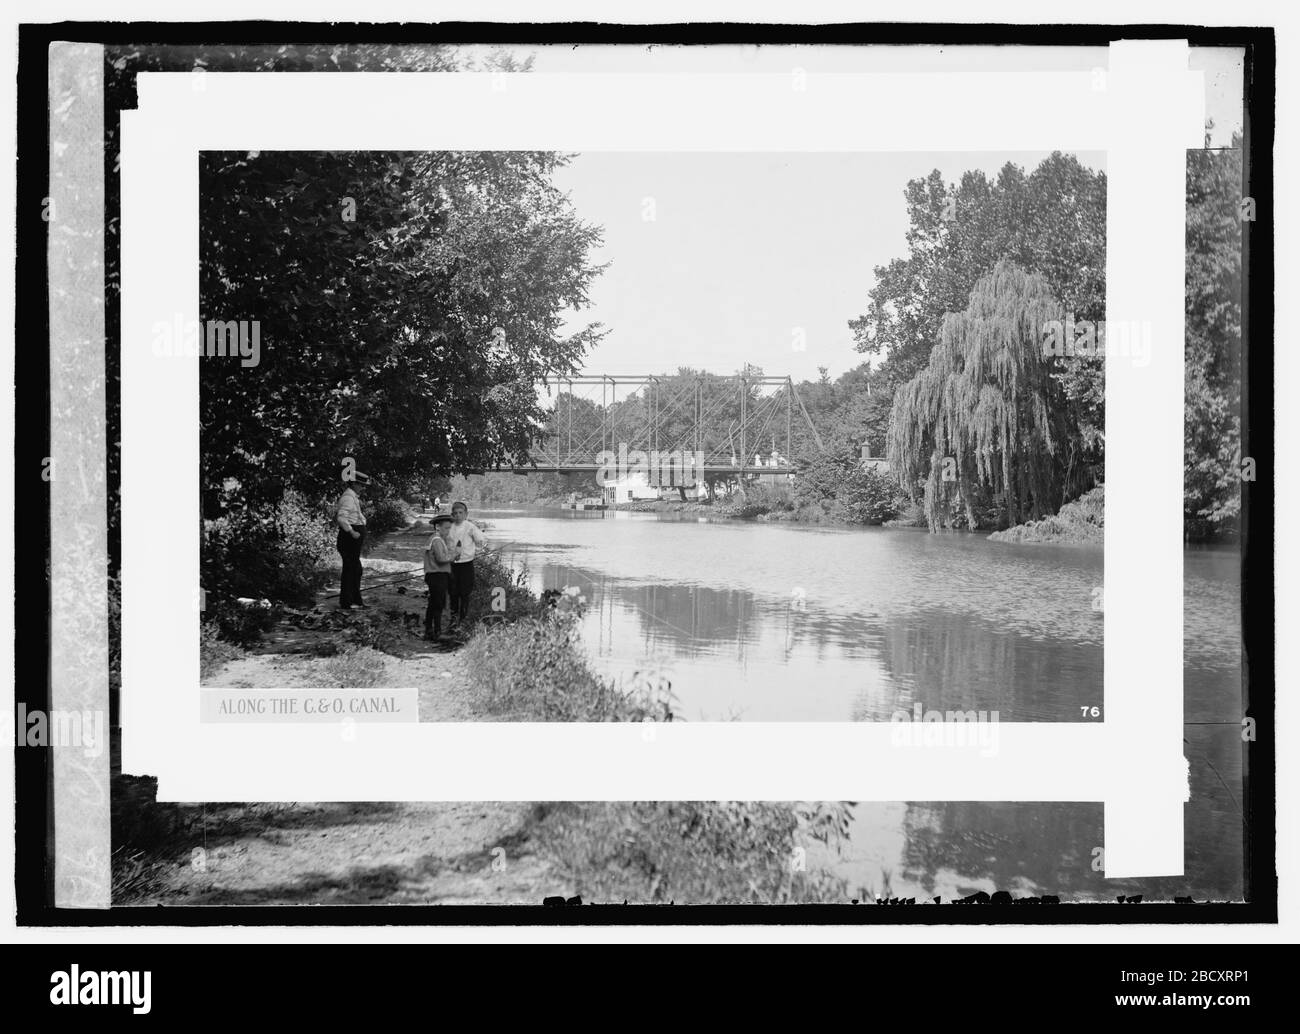 'English: Title: Along the C&O Canal: Chain Bridge Abstract/medium: 1 negative : glass ; 5 x 7 in. or smaller; between 1909 and 1923 date QS:P,+1950-00-00T00:00:00Z/7,P1319,+1909-00-00T00:00:00Z/9,P1326,+1923-00-00T00:00:00Z/9; Library of Congress Catalog: http://lccn.loc.gov/2016820515 Image download: http://cdn.loc.gov/master/pnp/npcc/18800/18826u.tif Original url: https://www.loc.gov/pictures/item/2016820515/; National Photo Company Collection; ' Stock Photo